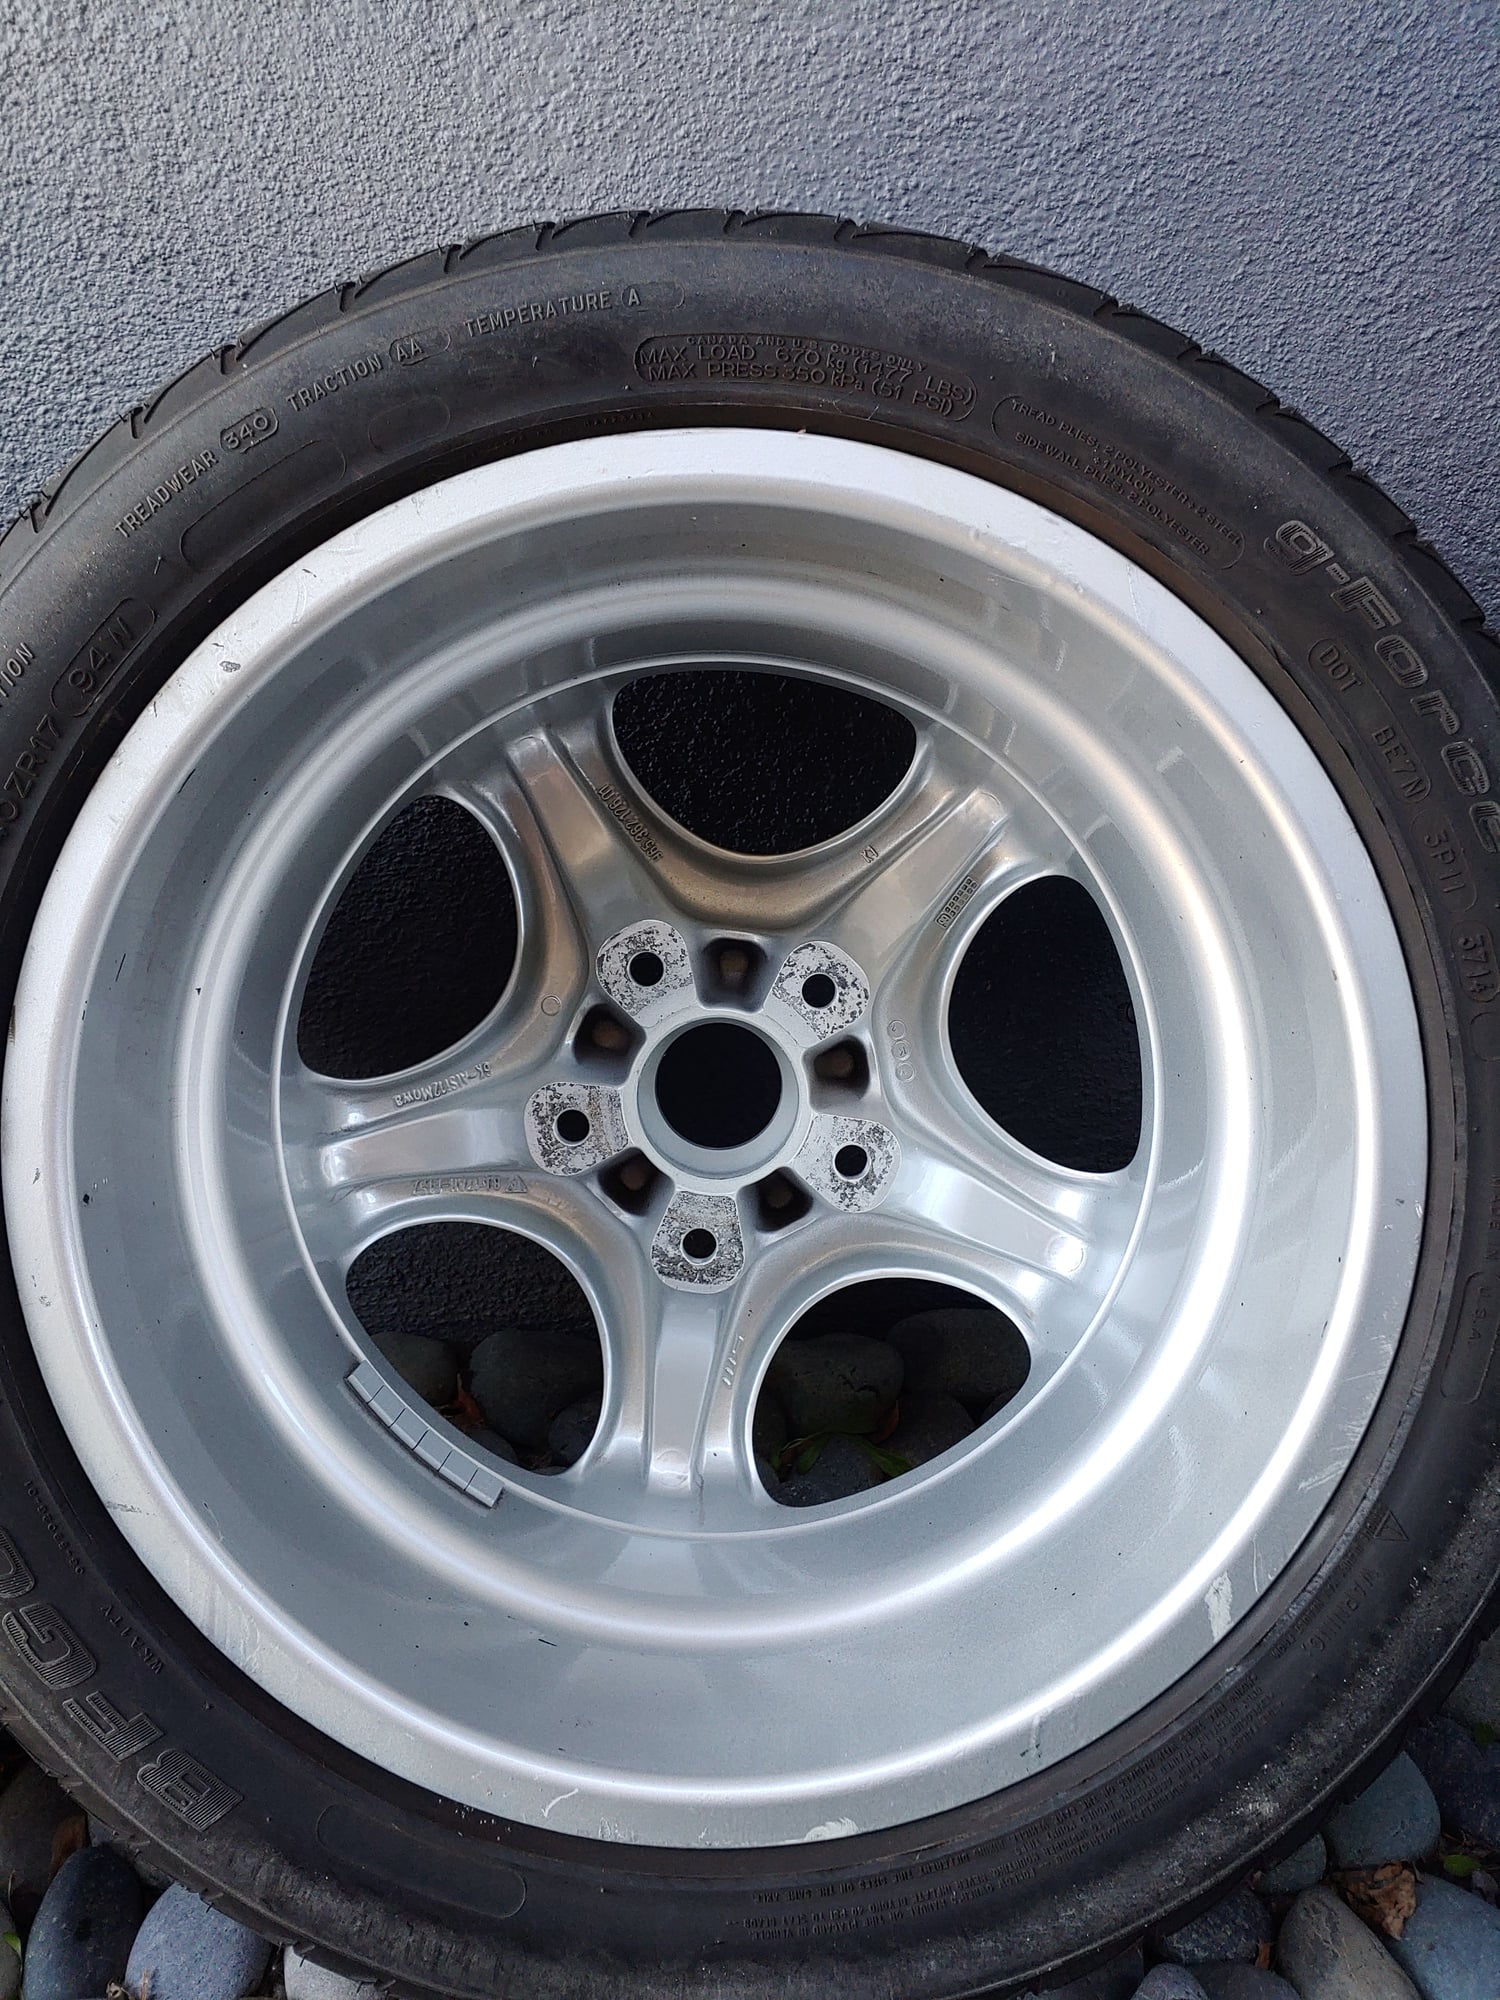 Wheels and Tires/Axles - FS: OEM 17" Cup 1 wheels from RS America - Los Angeles, CA - Used - Los Angeles, CA 90240, United States